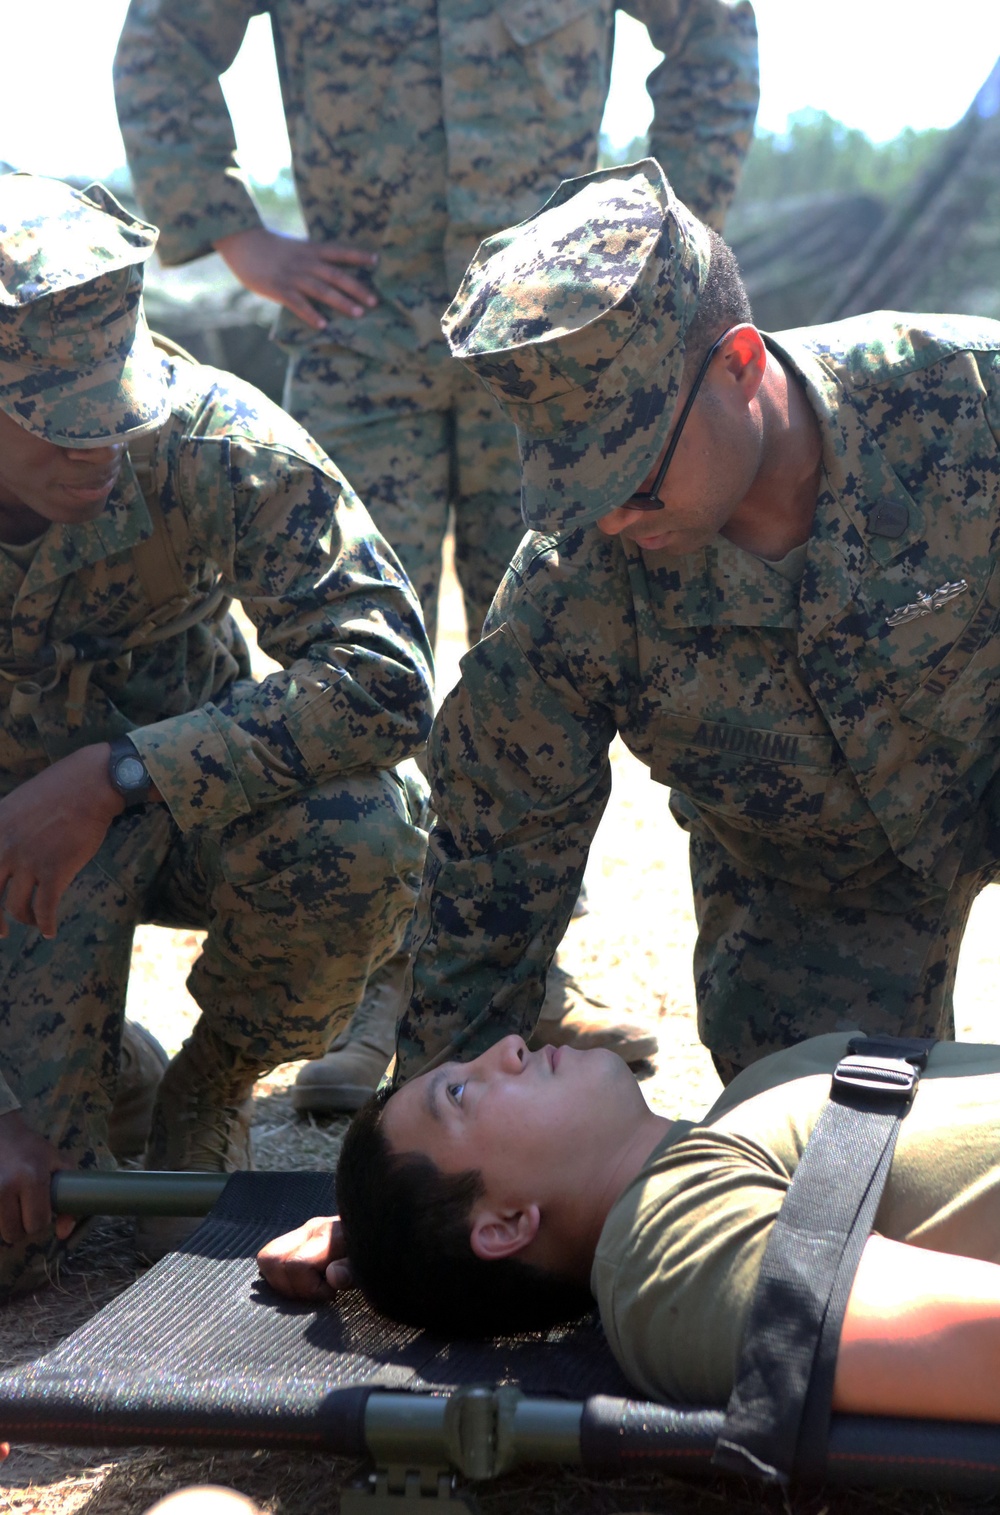 Corpsmen up! Sailors train for mass casualty treatment